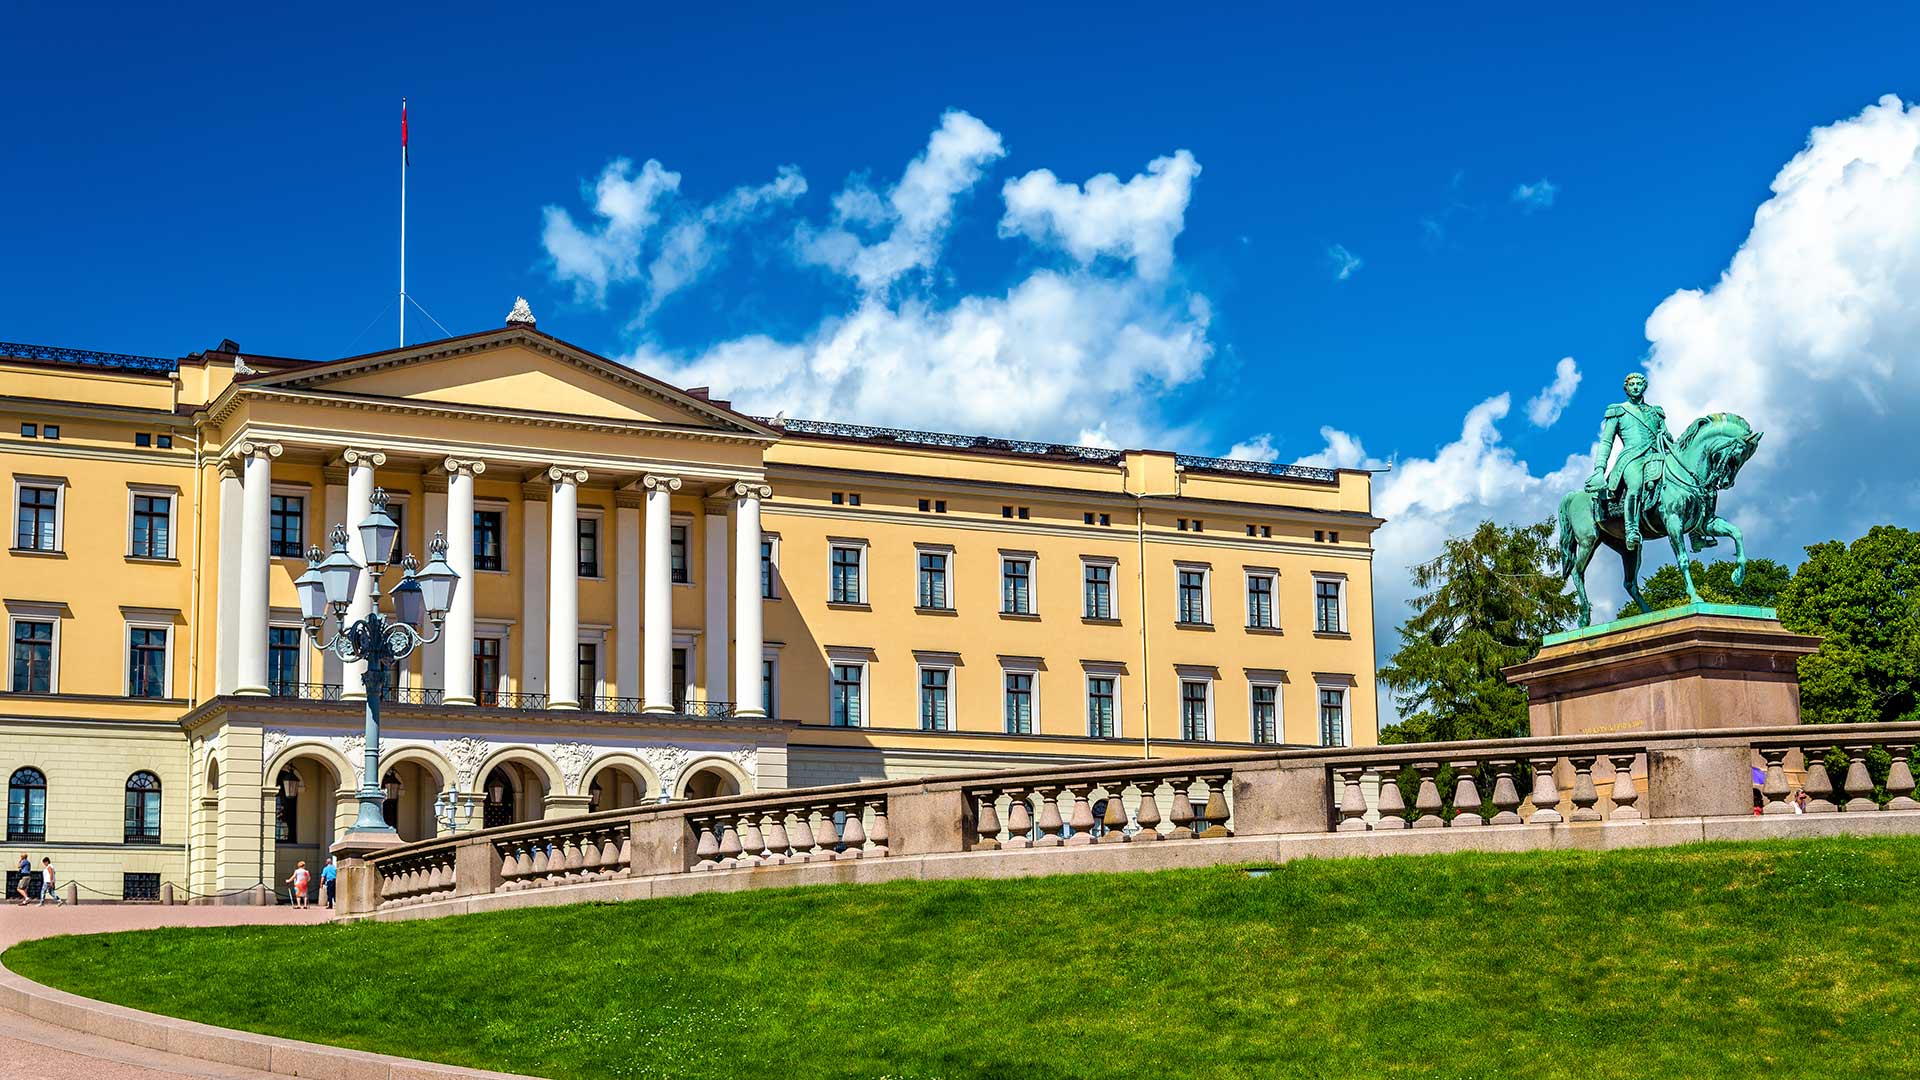 The Royal Palace in Oslo